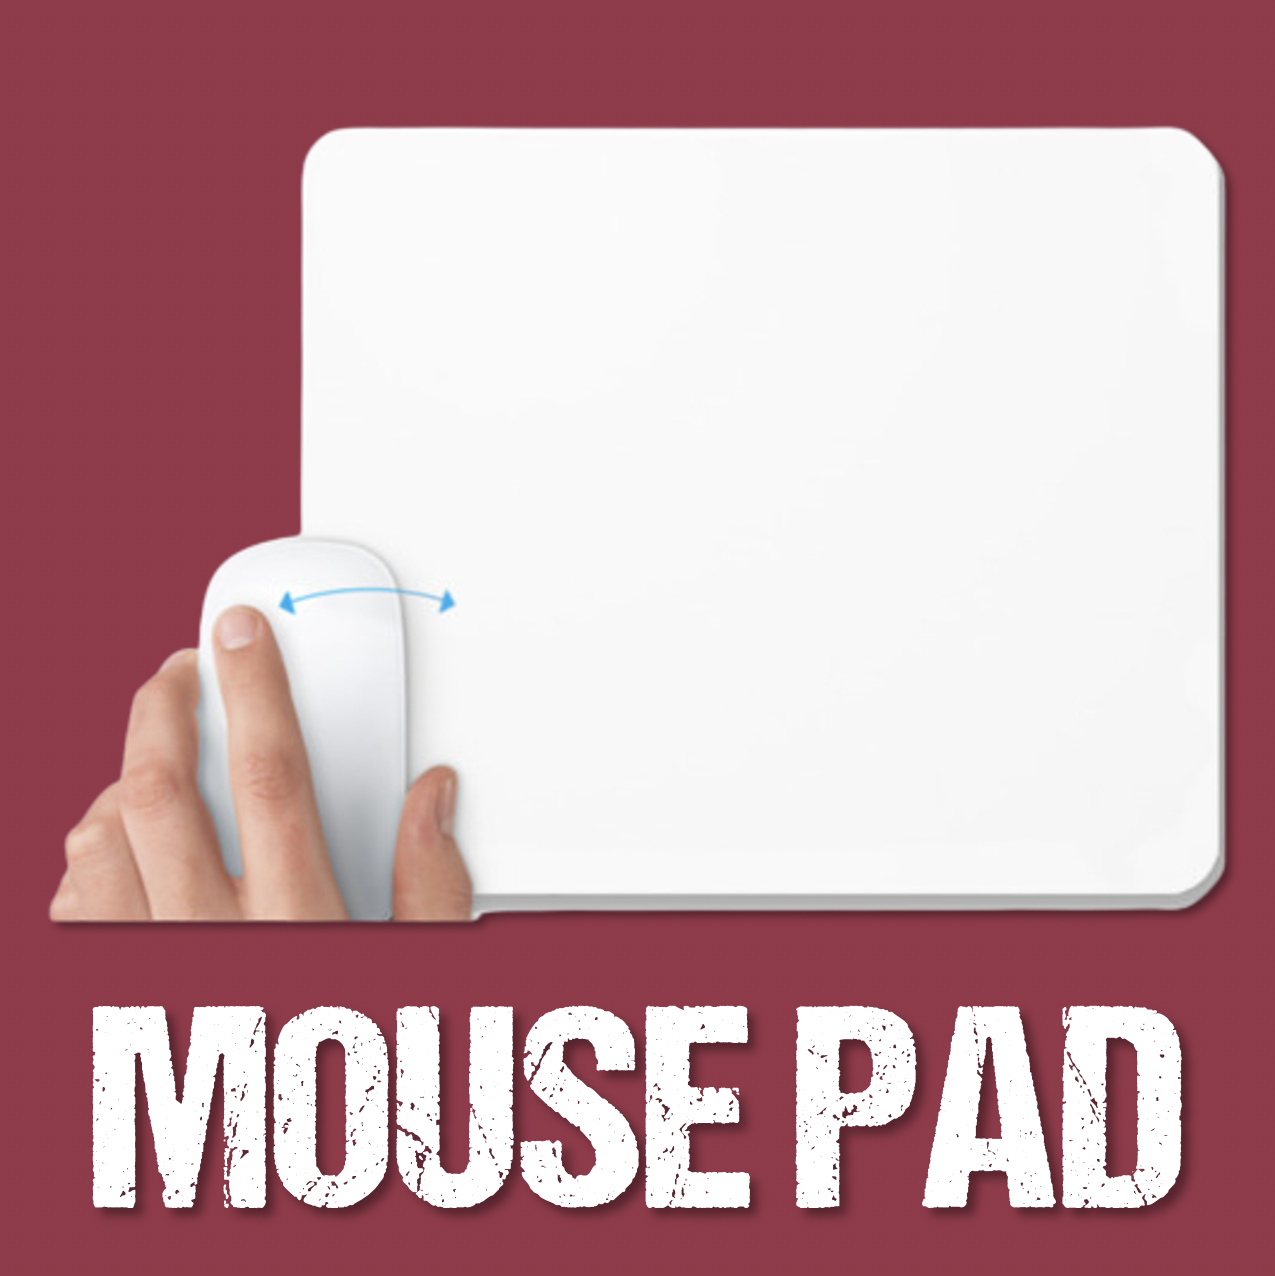 MOUSE PAD